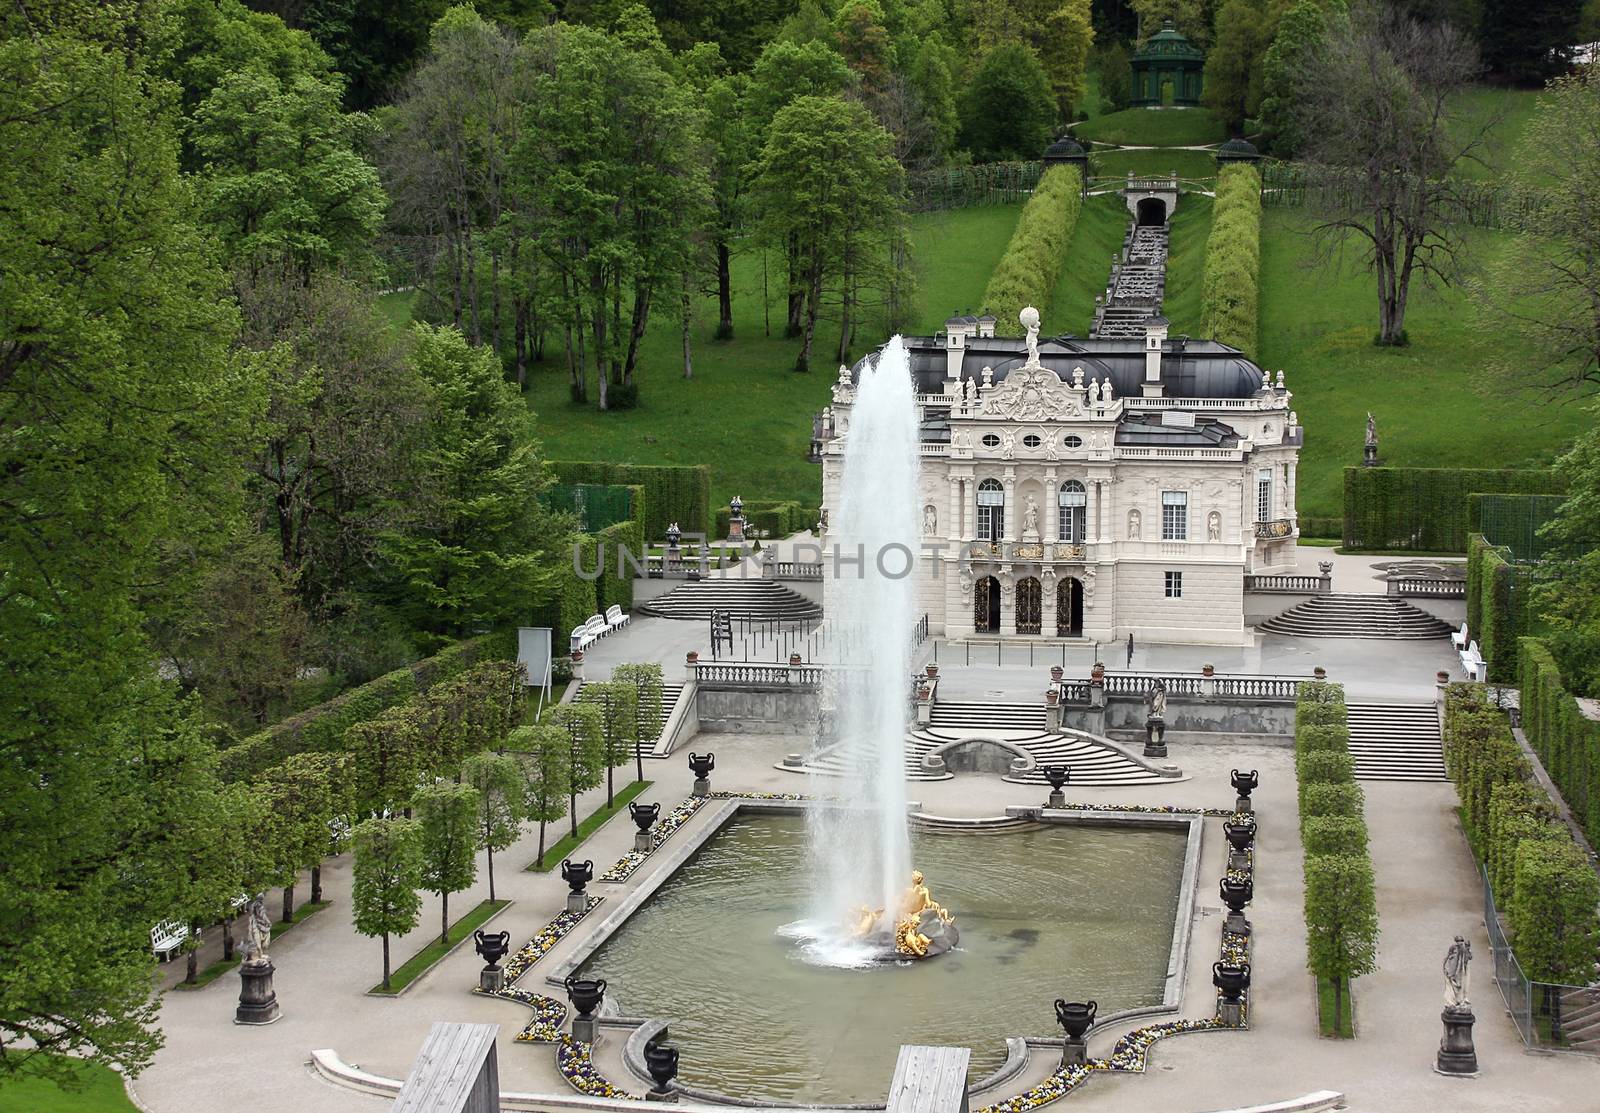 Linderhof Palace is the smallest of the three palaces built by King Ludwig II of Bavaria